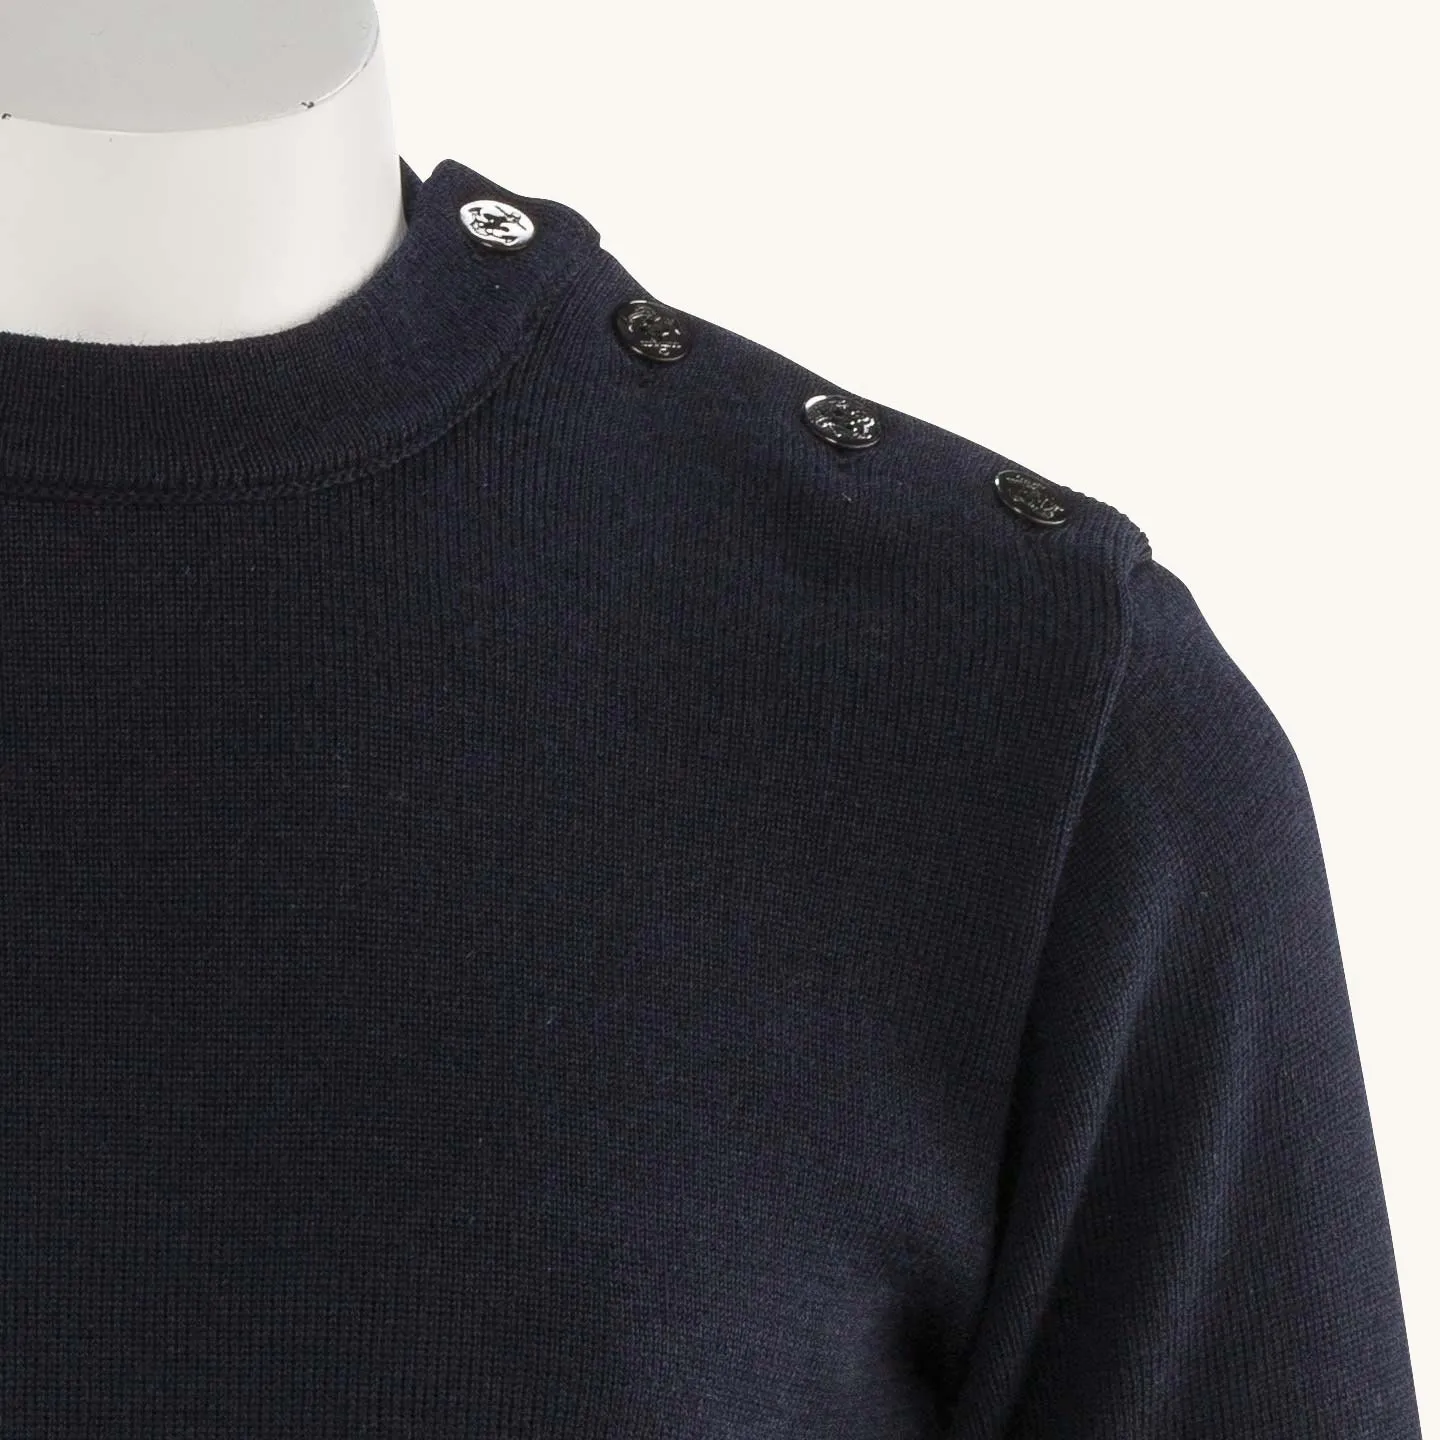 Pullover 100% pure wool Navy, unisex Orcival